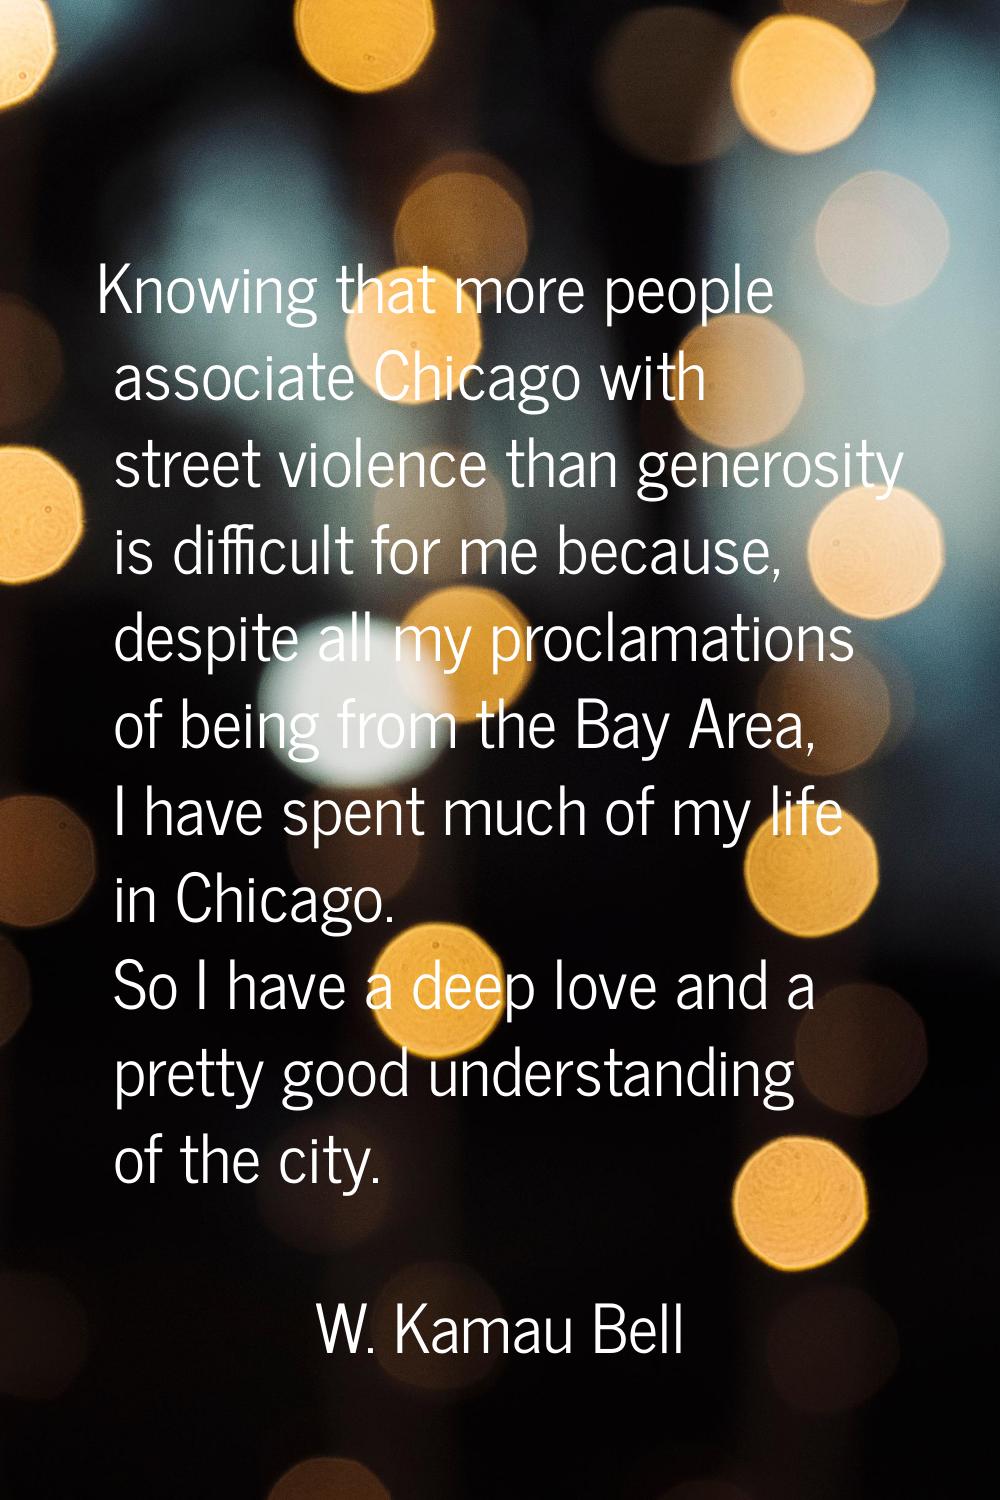 Knowing that more people associate Chicago with street violence than generosity is difficult for me